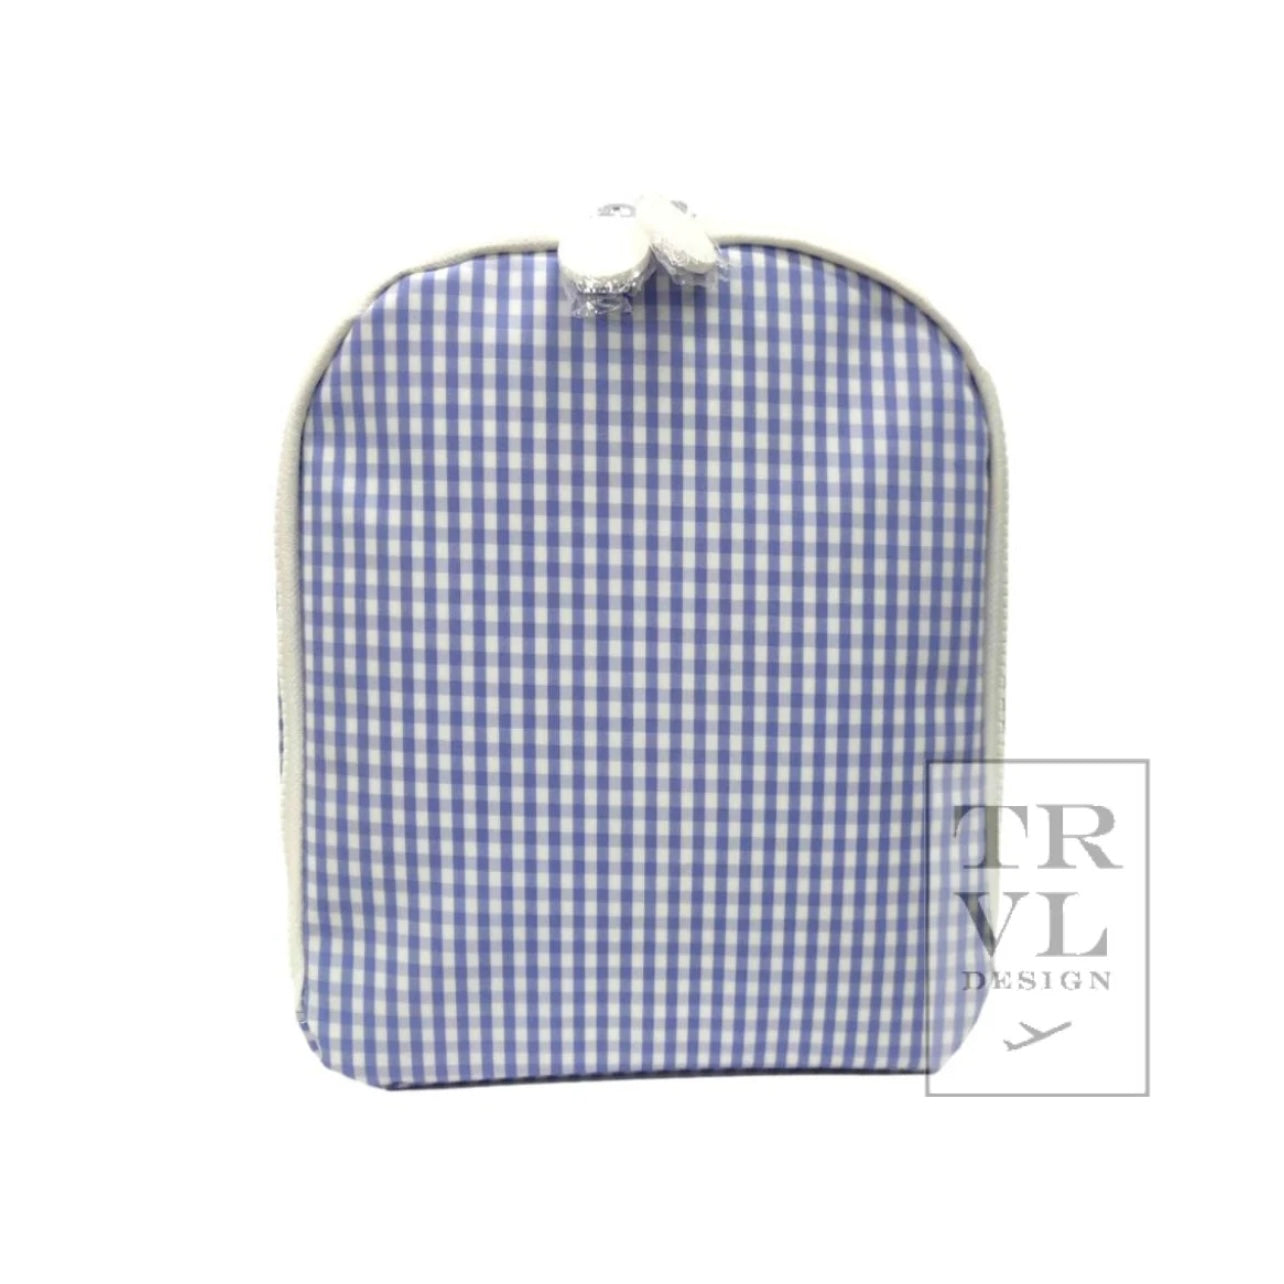 Bring It Lunch Tote - Lilac Gingham